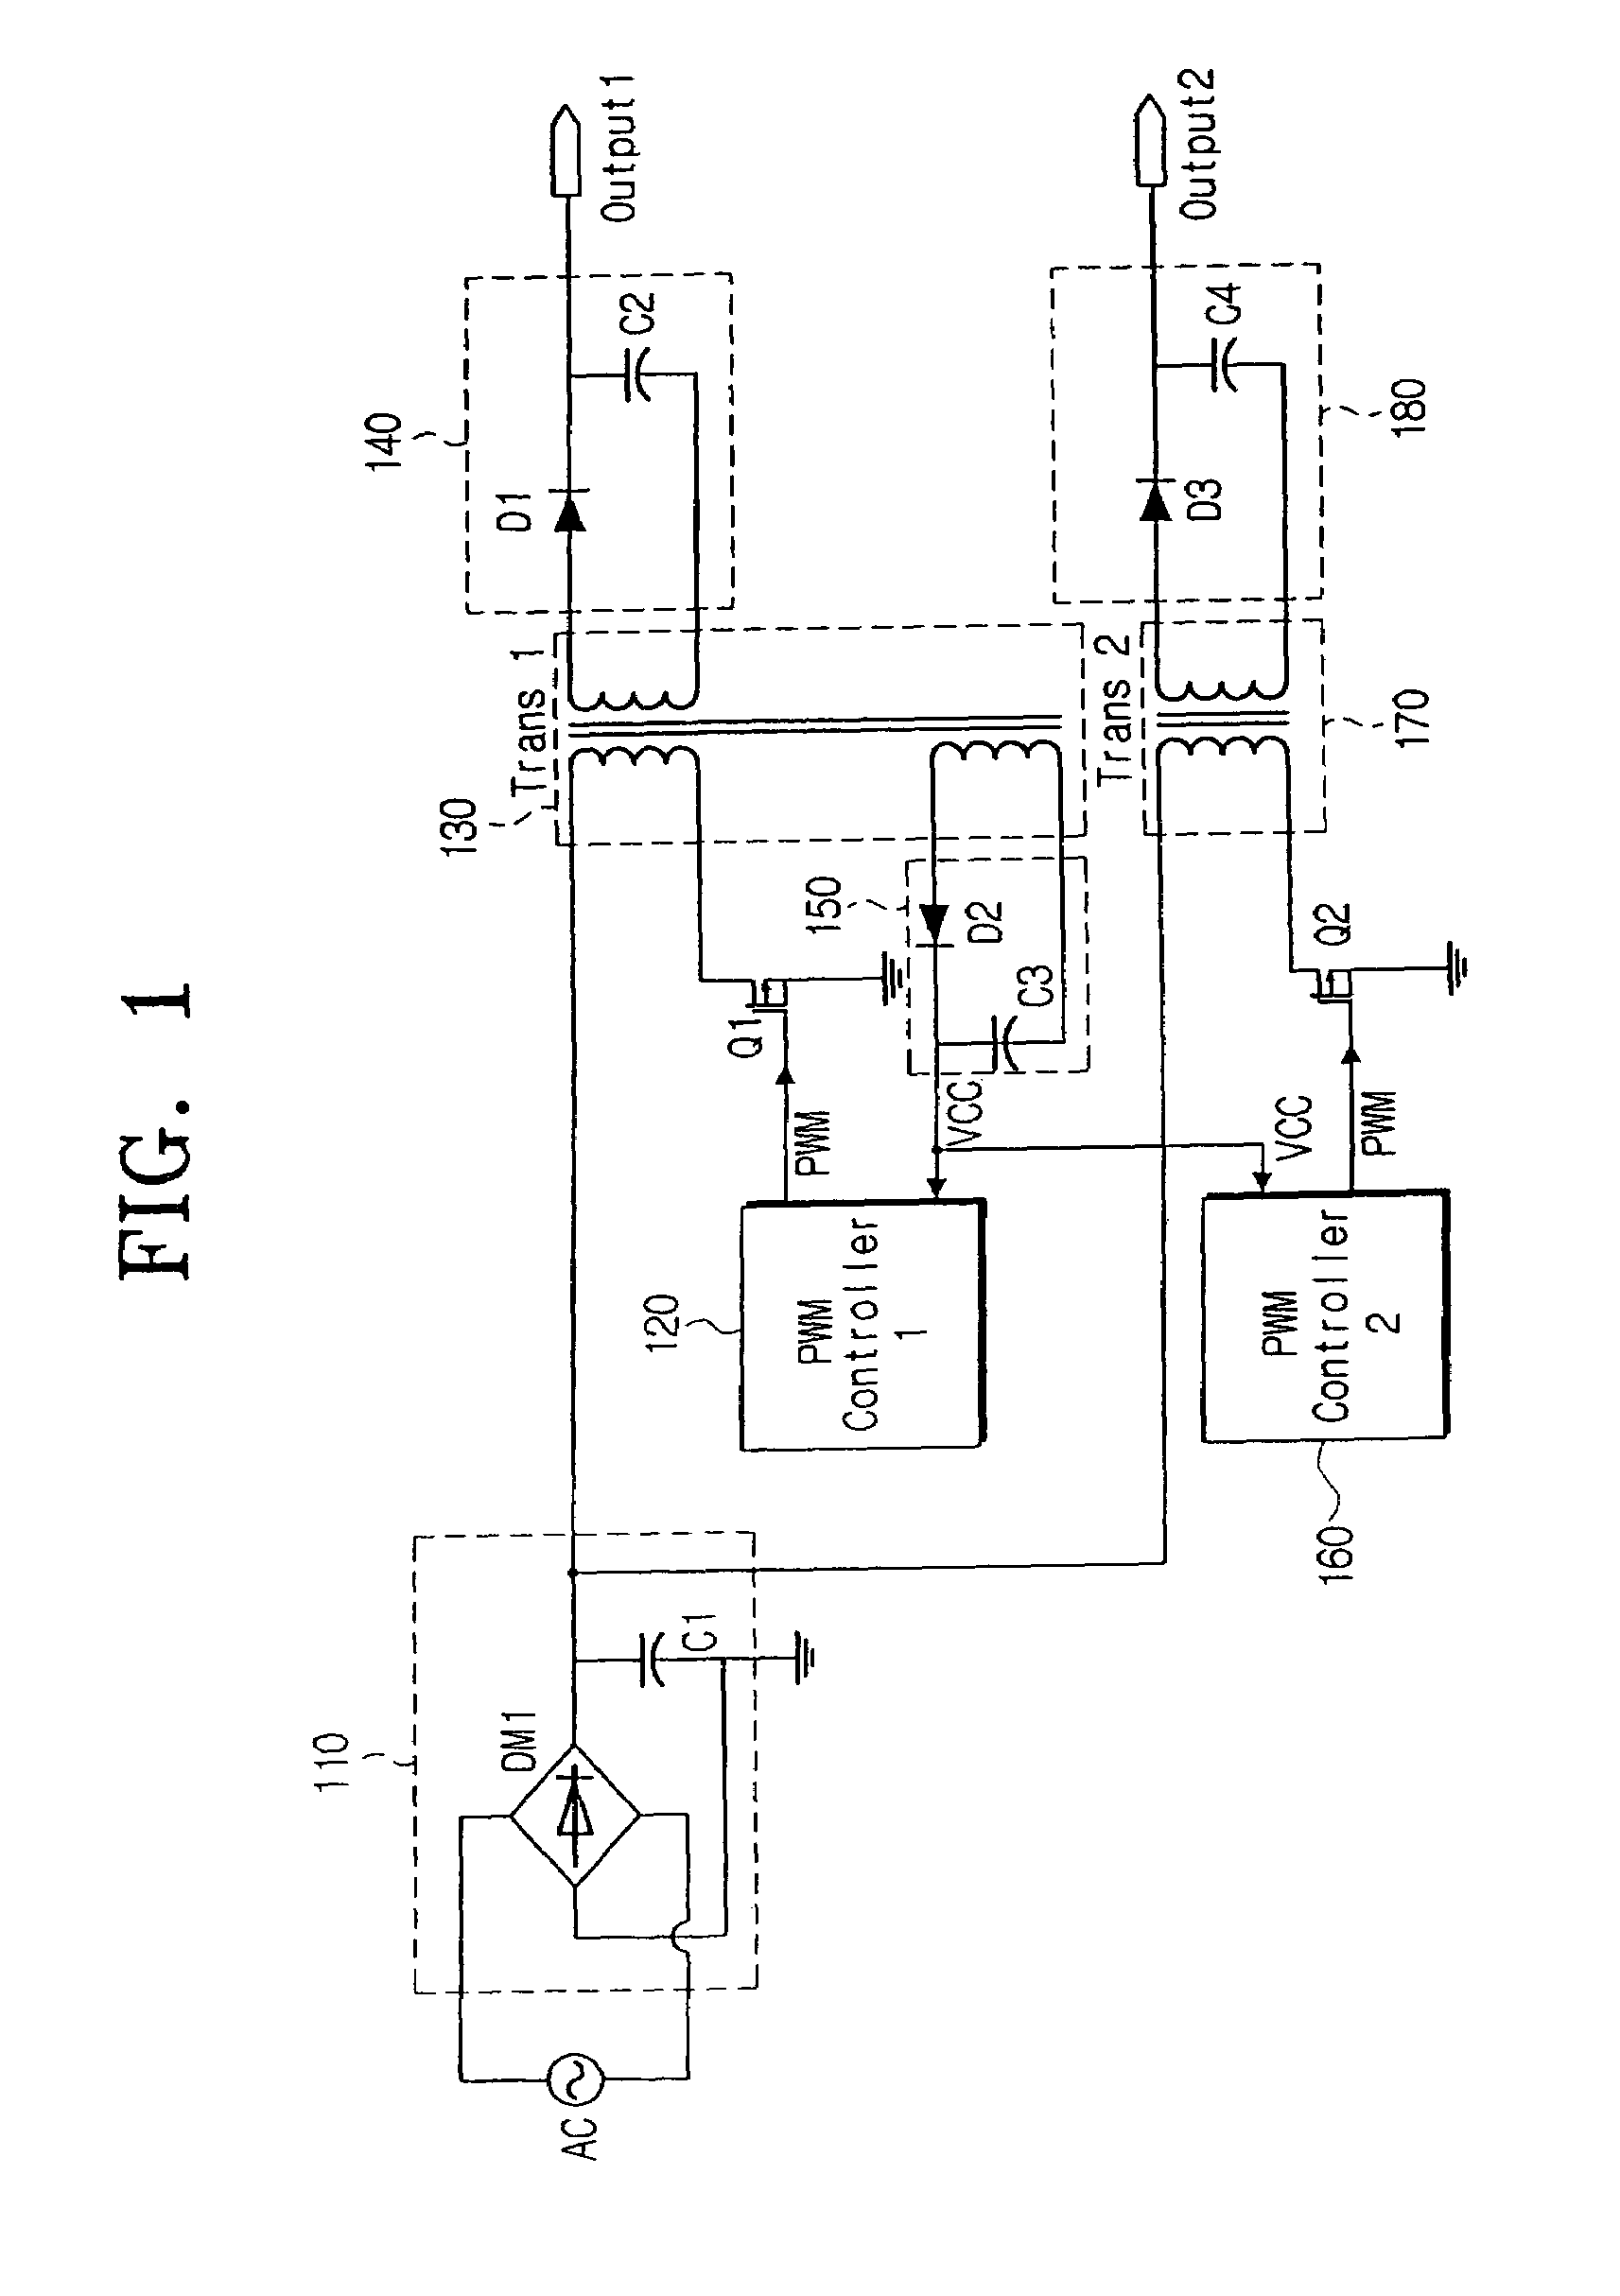 Switching mode power supply and a method of operating the power supply in a power save mode